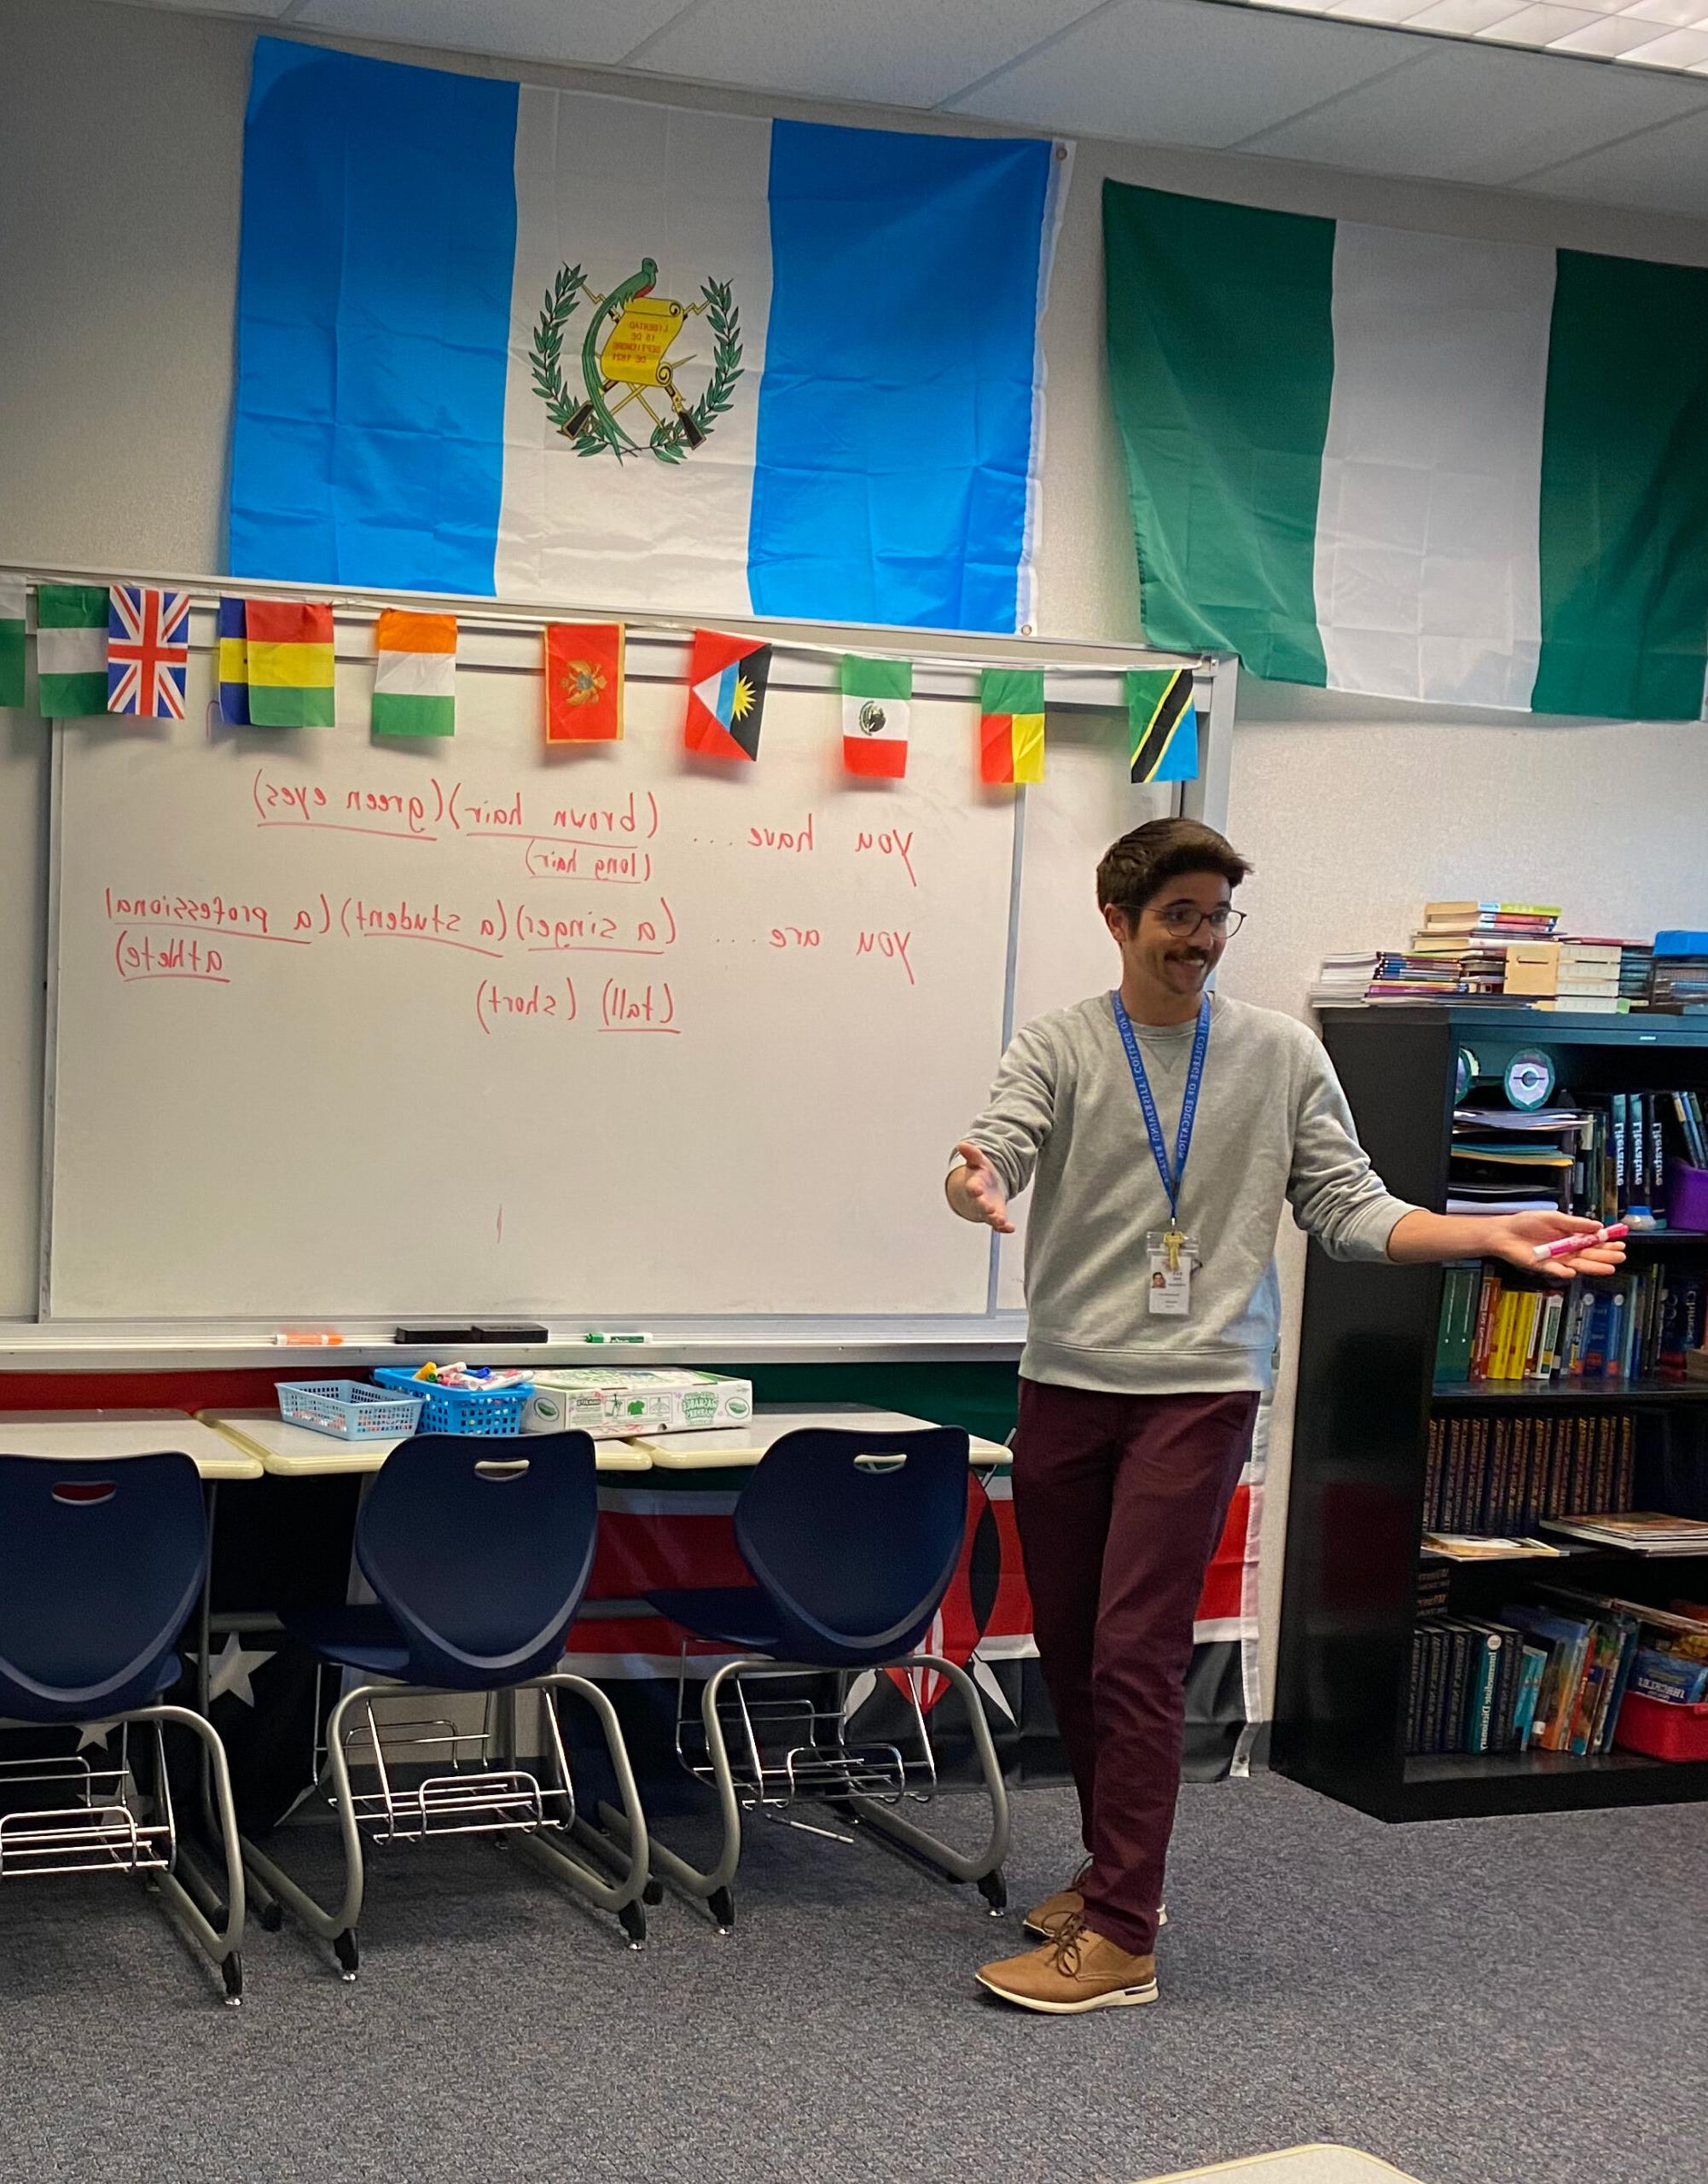 A language class with different colored flags